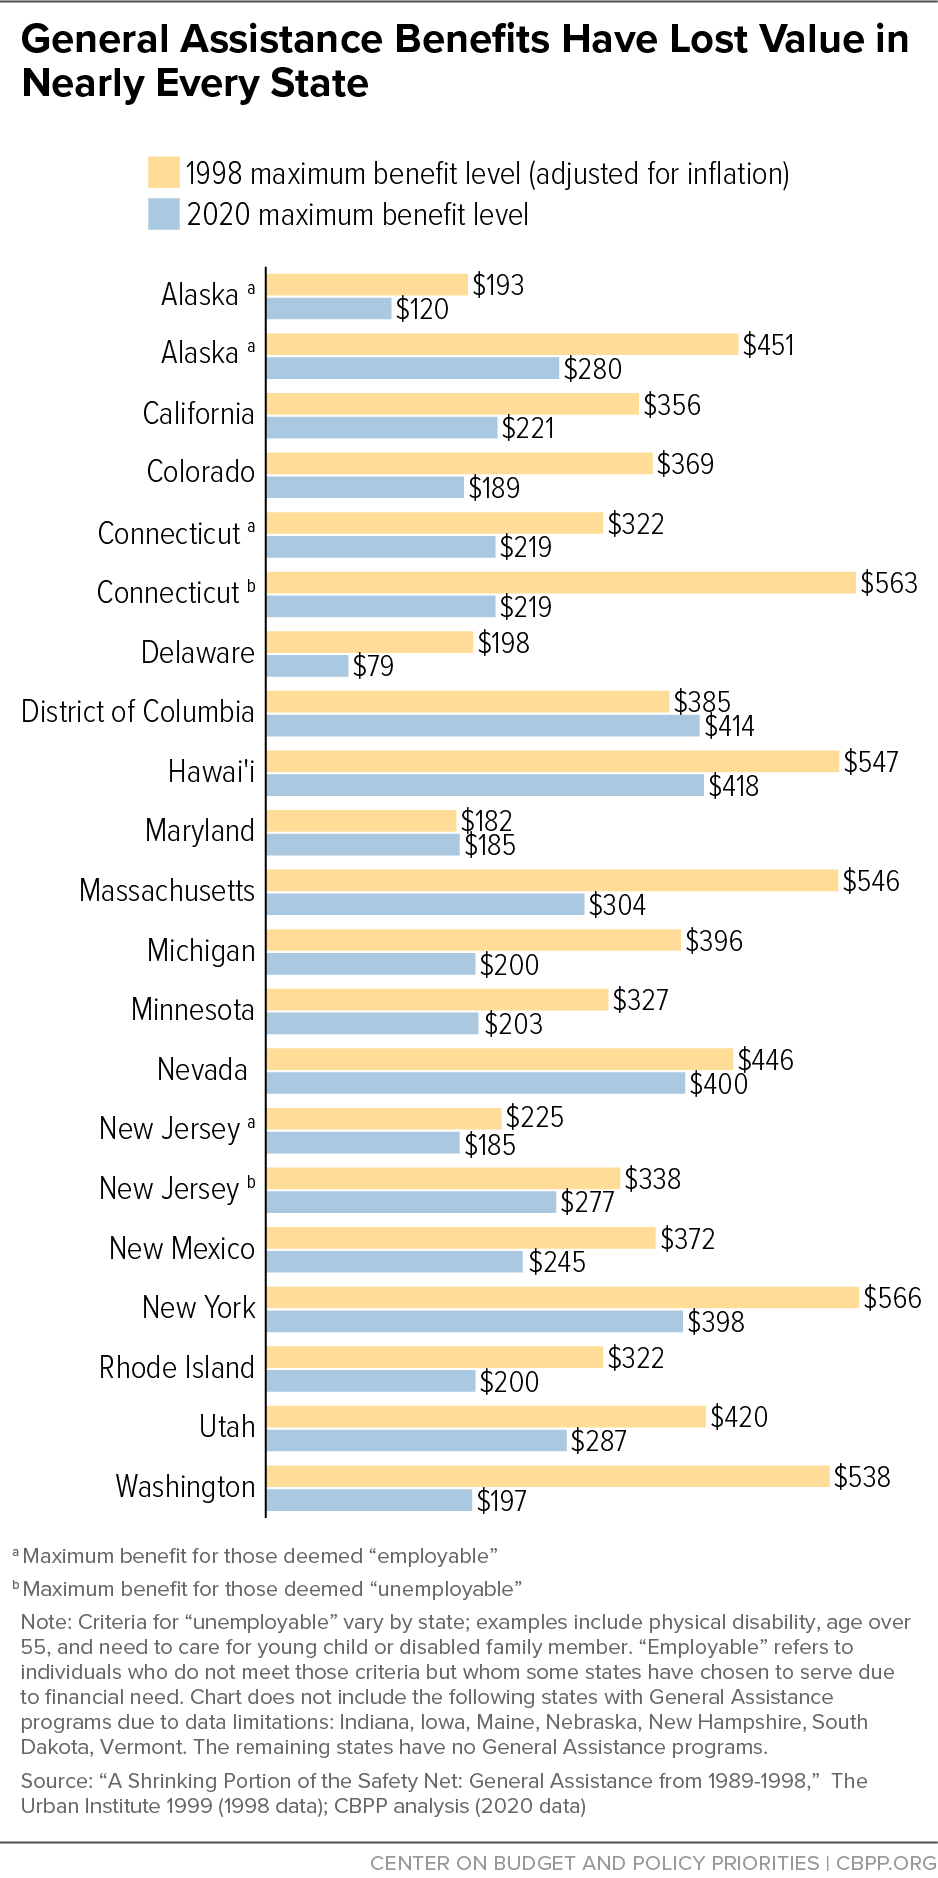 General Assistance Benefits Have Lost Value in Nearly Every State